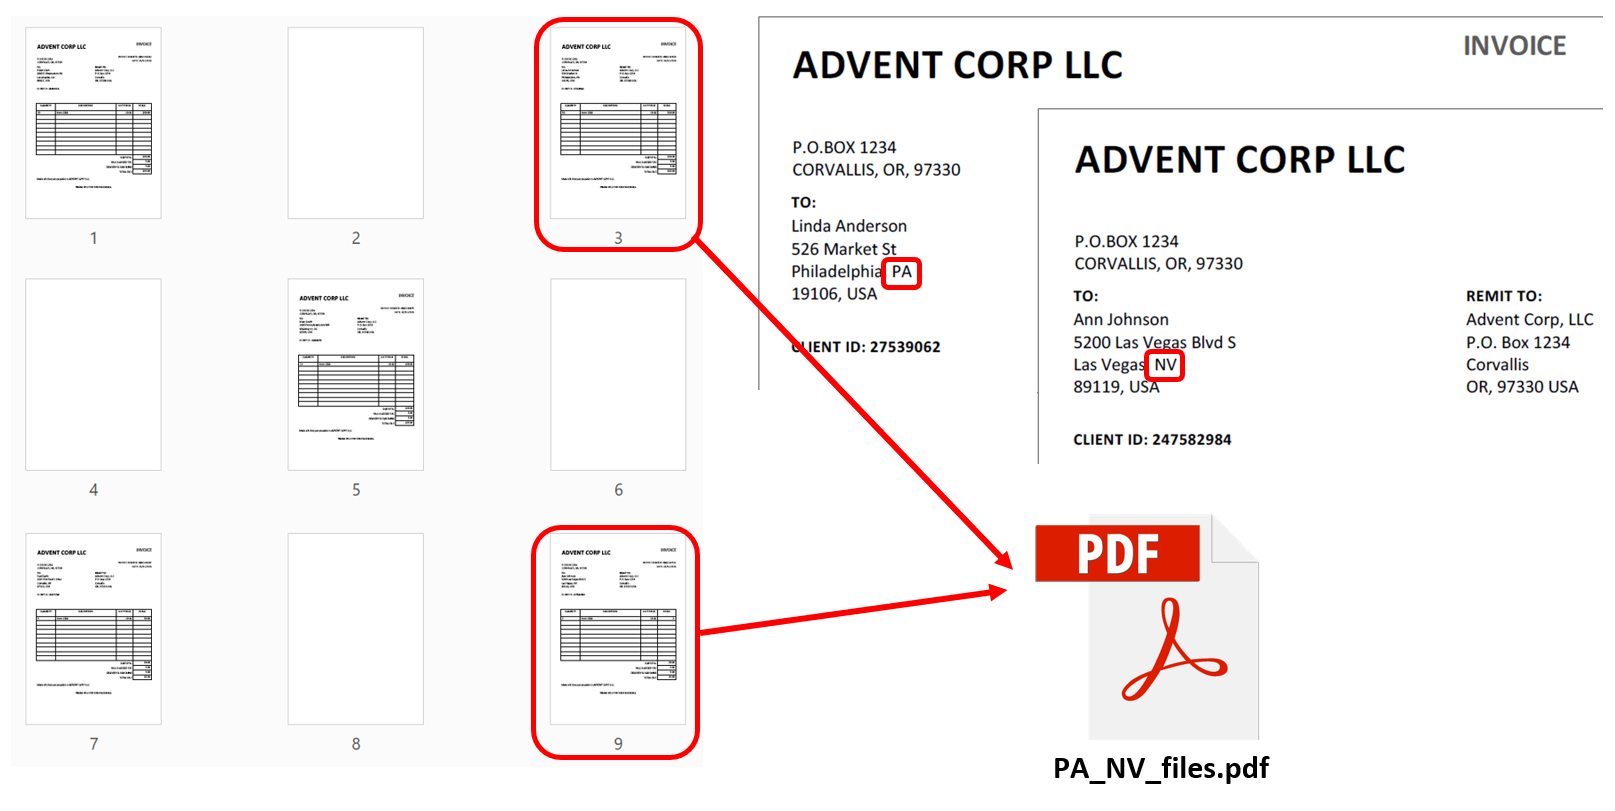 Split PDF - Extract PDF Pages on the App Store